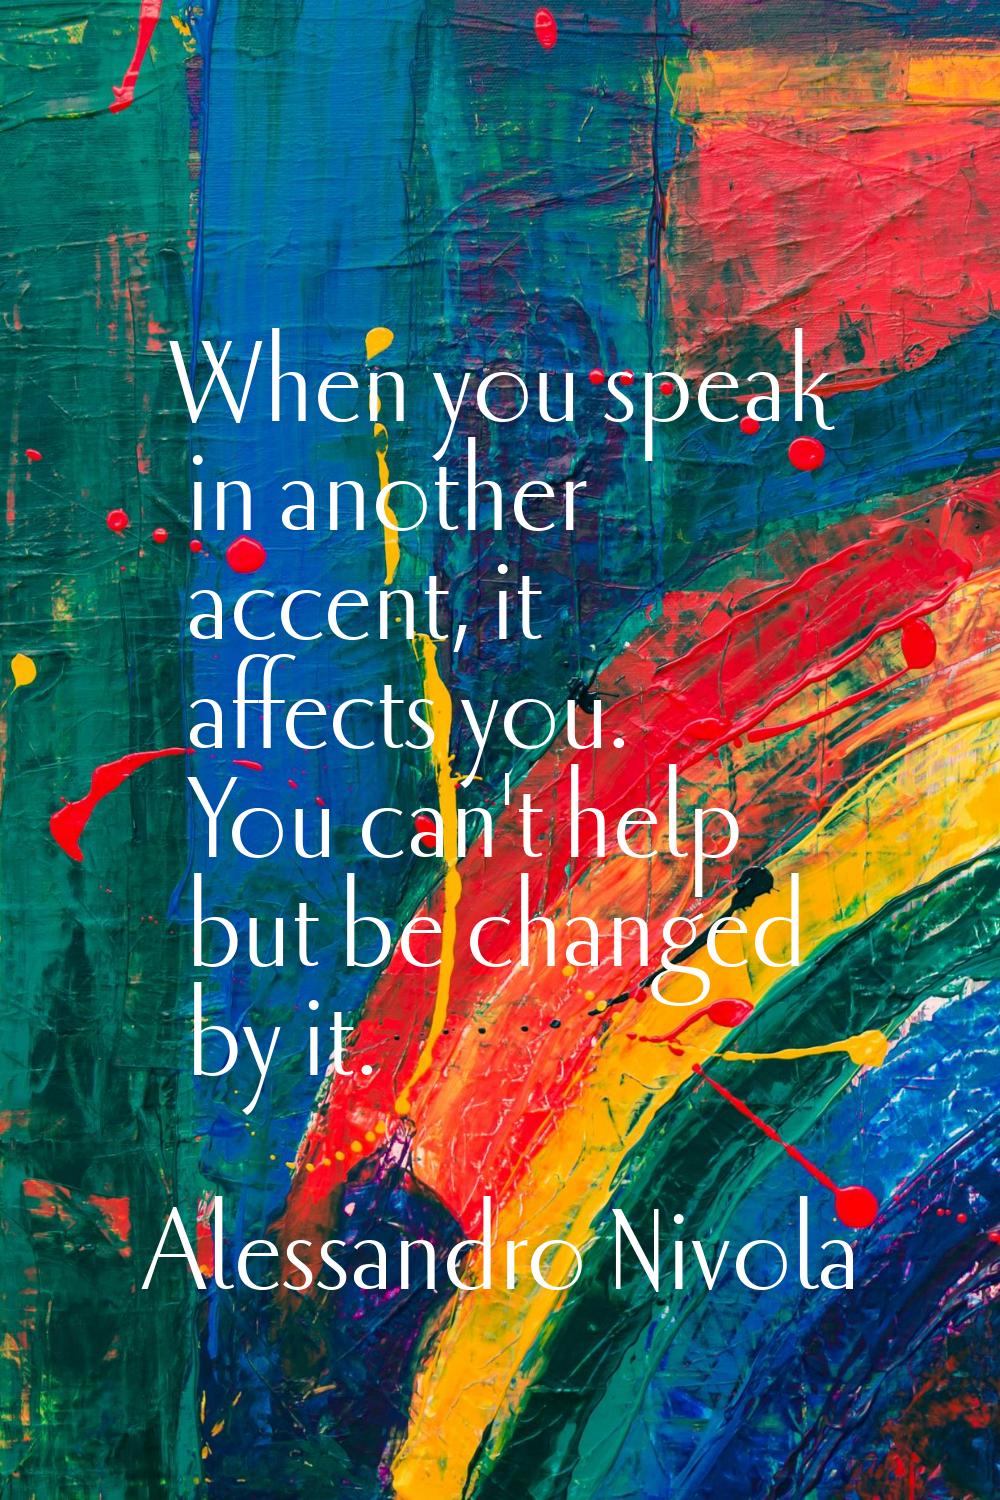 When you speak in another accent, it affects you. You can't help but be changed by it.